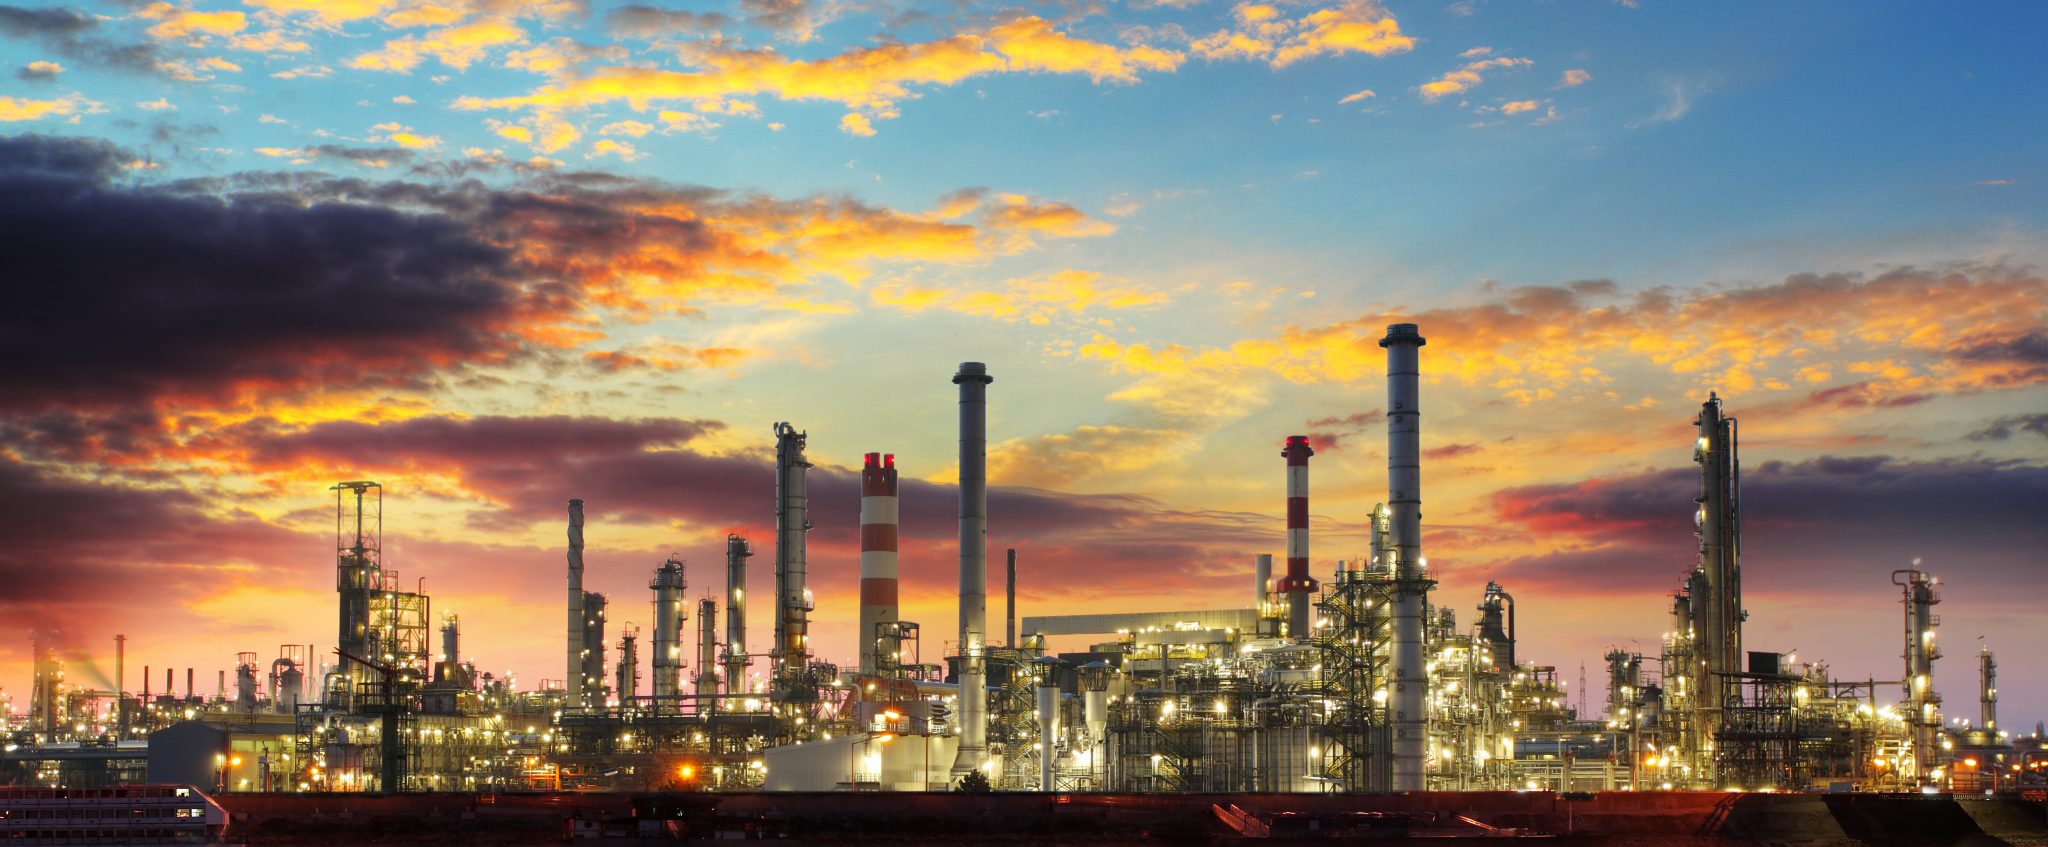 Duqm Refinery One of 6 Projects Totaling $10.3bn Completed by Oman Investment Authority